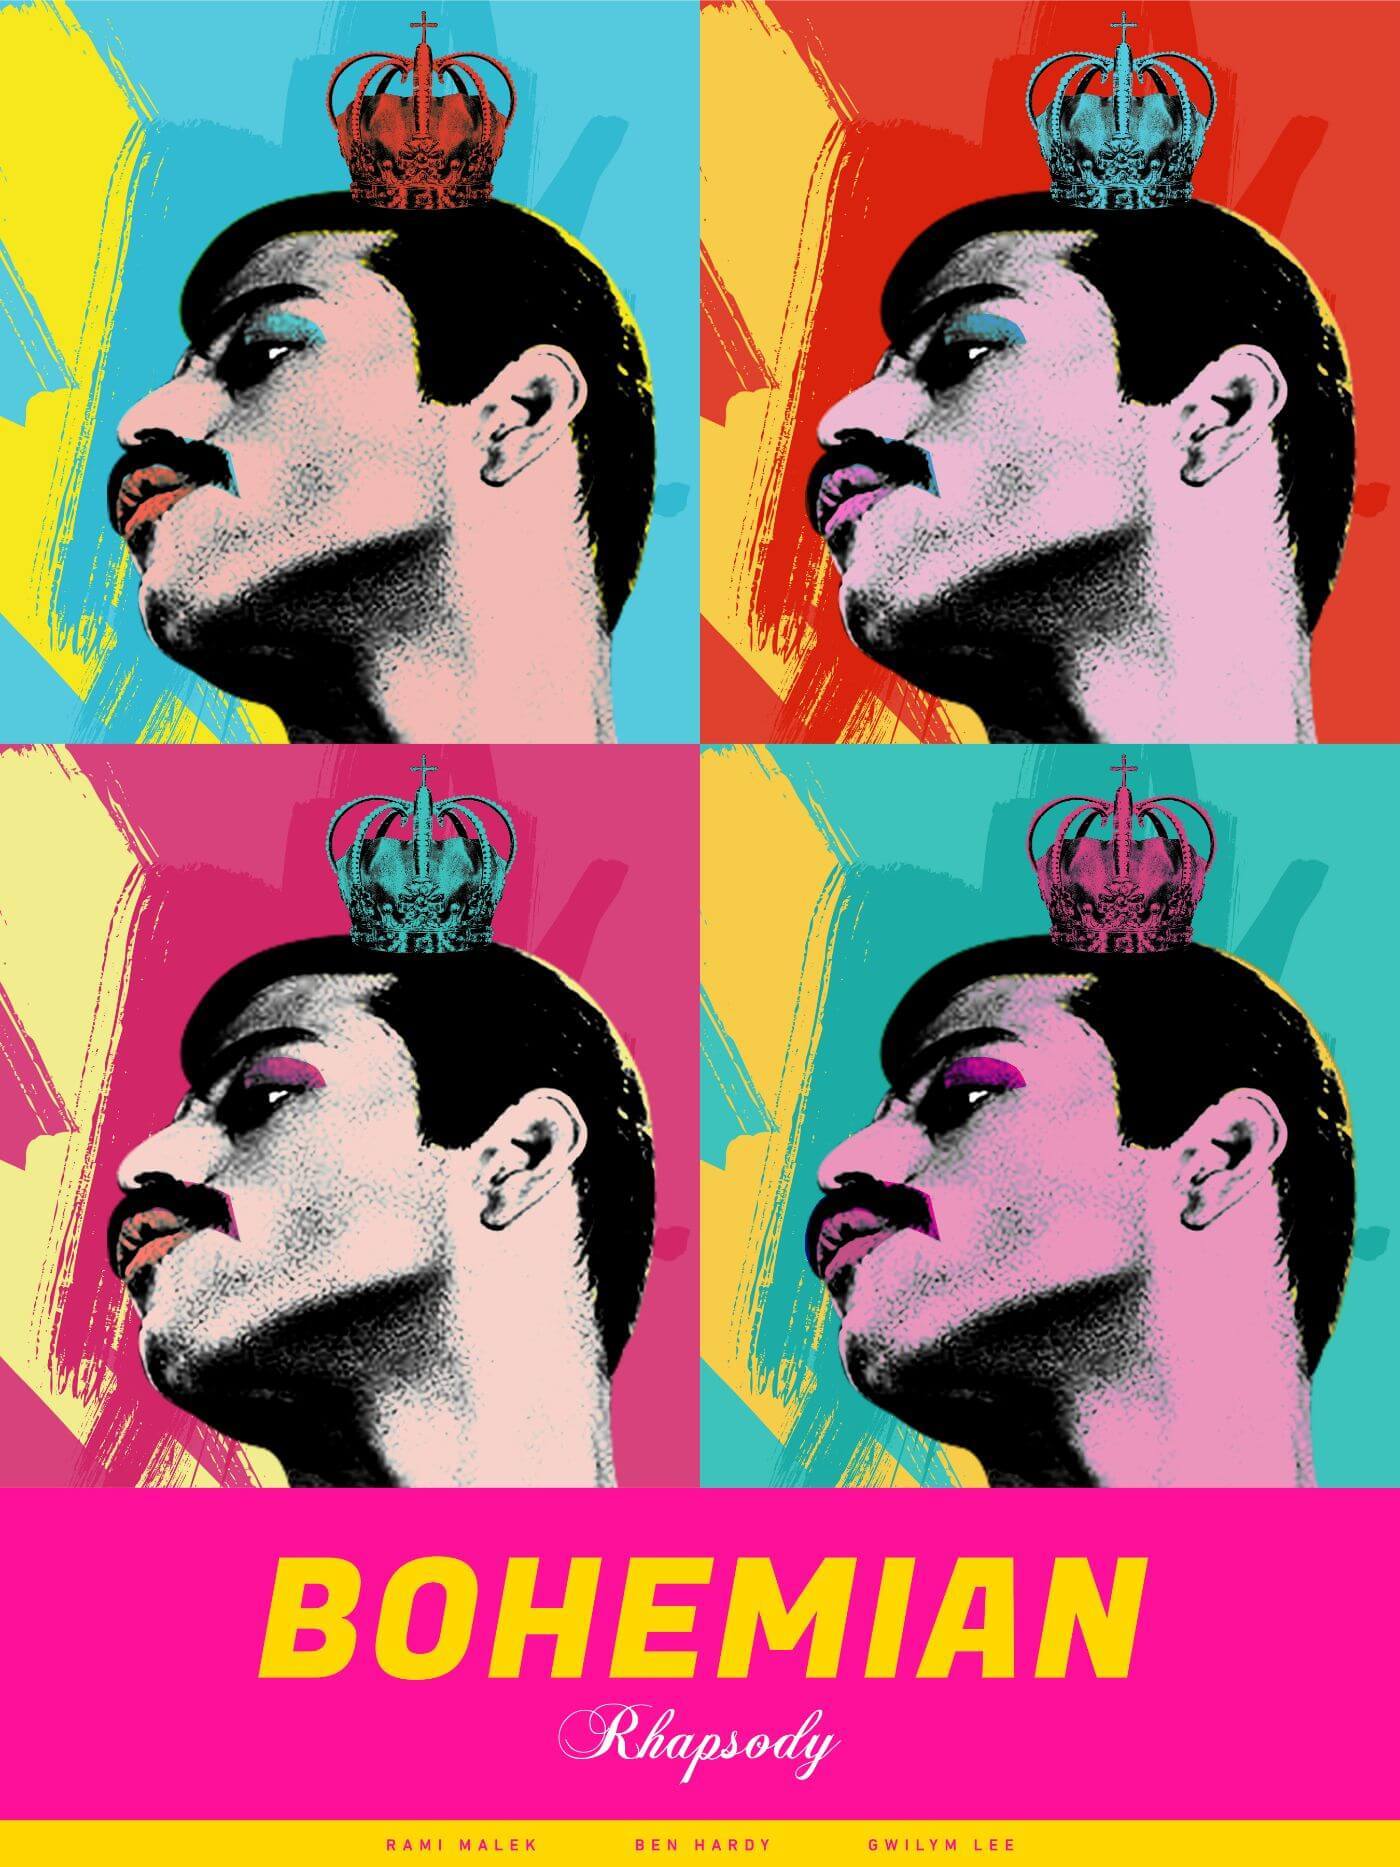 Bohemian Rhapsody - Hollywood Movie Pop Art Poster Collection - Art Prints  by Tim, Buy Posters, Frames, Canvas & Digital Art Prints